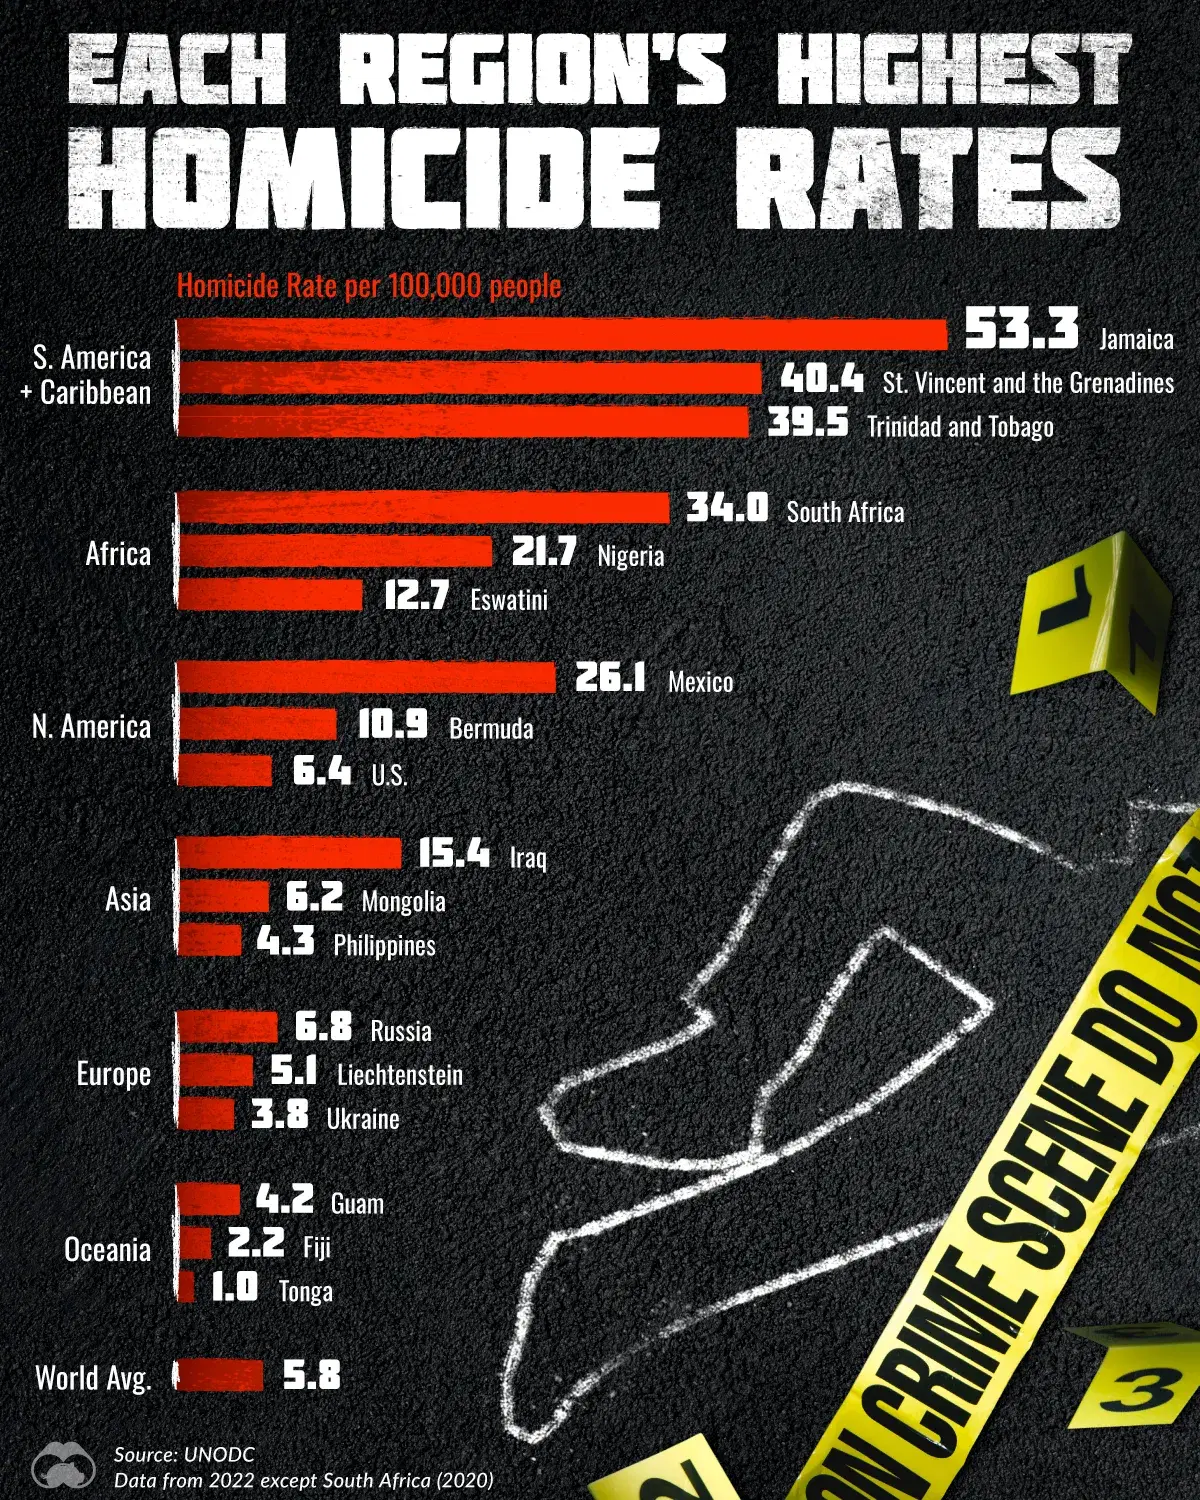 Countries with the Highest Homicide Rates by Region